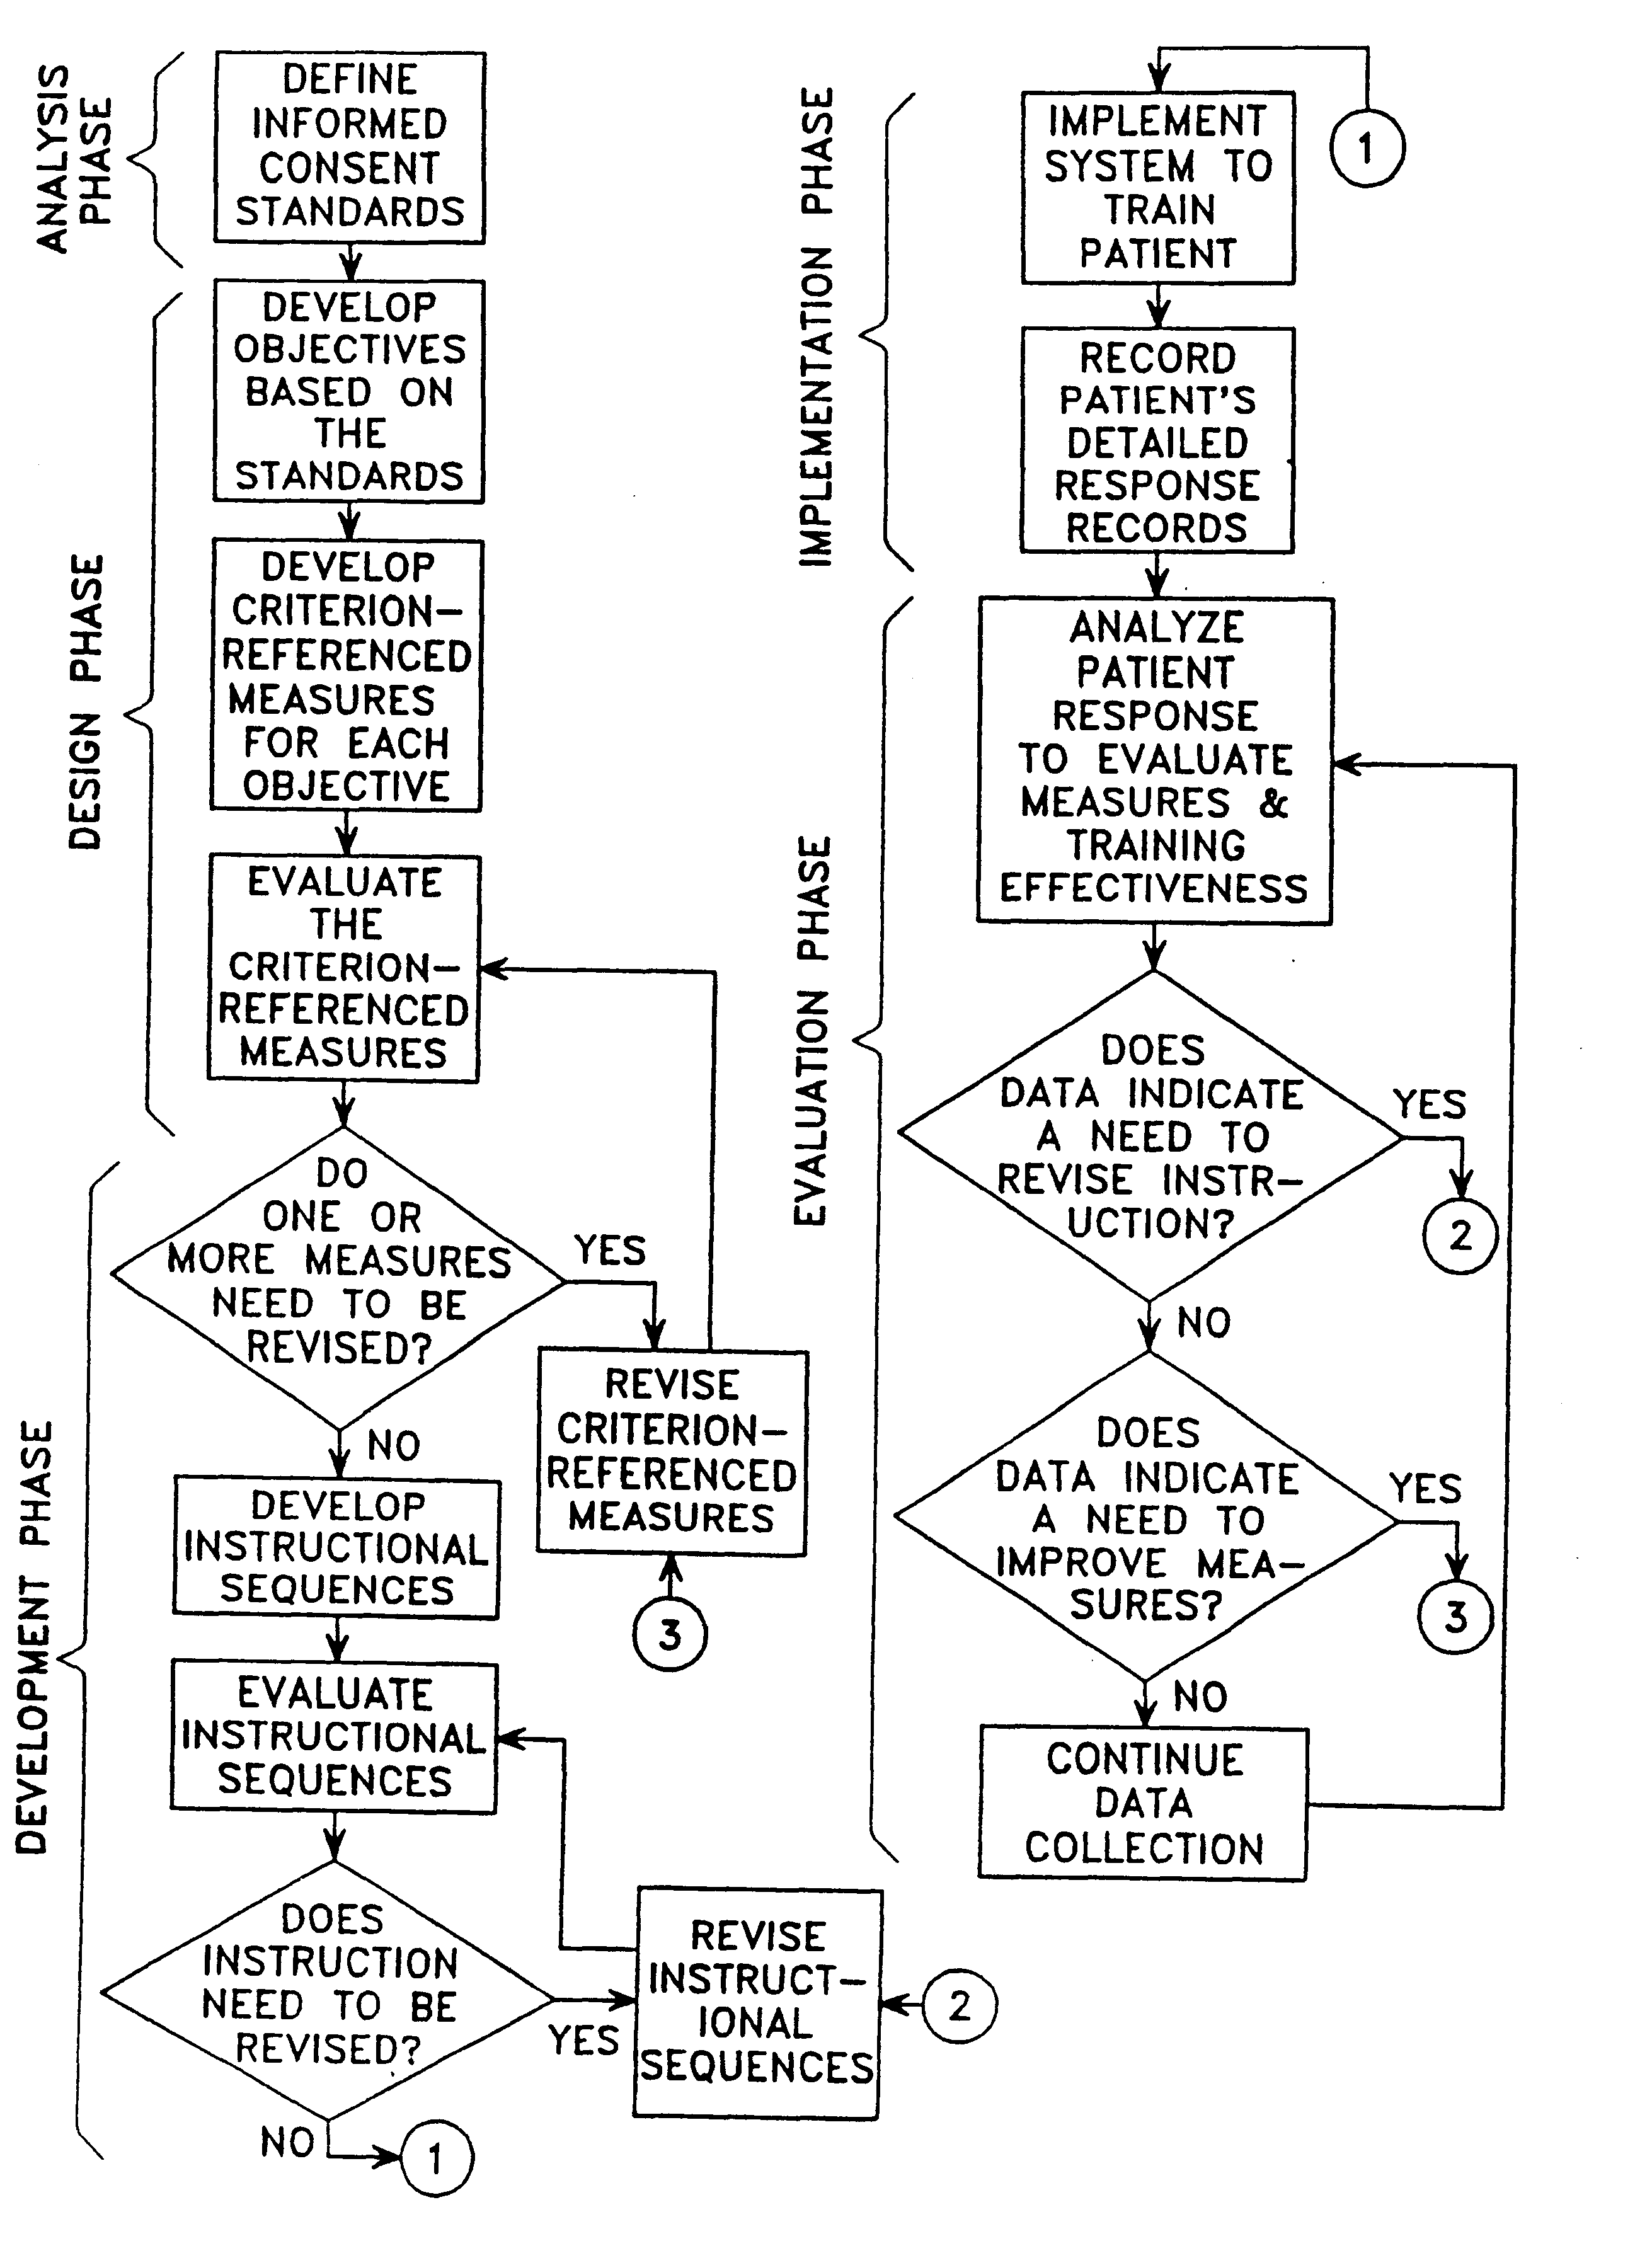 Computer accessible methods for establishing certifiable informed consent for a procedure